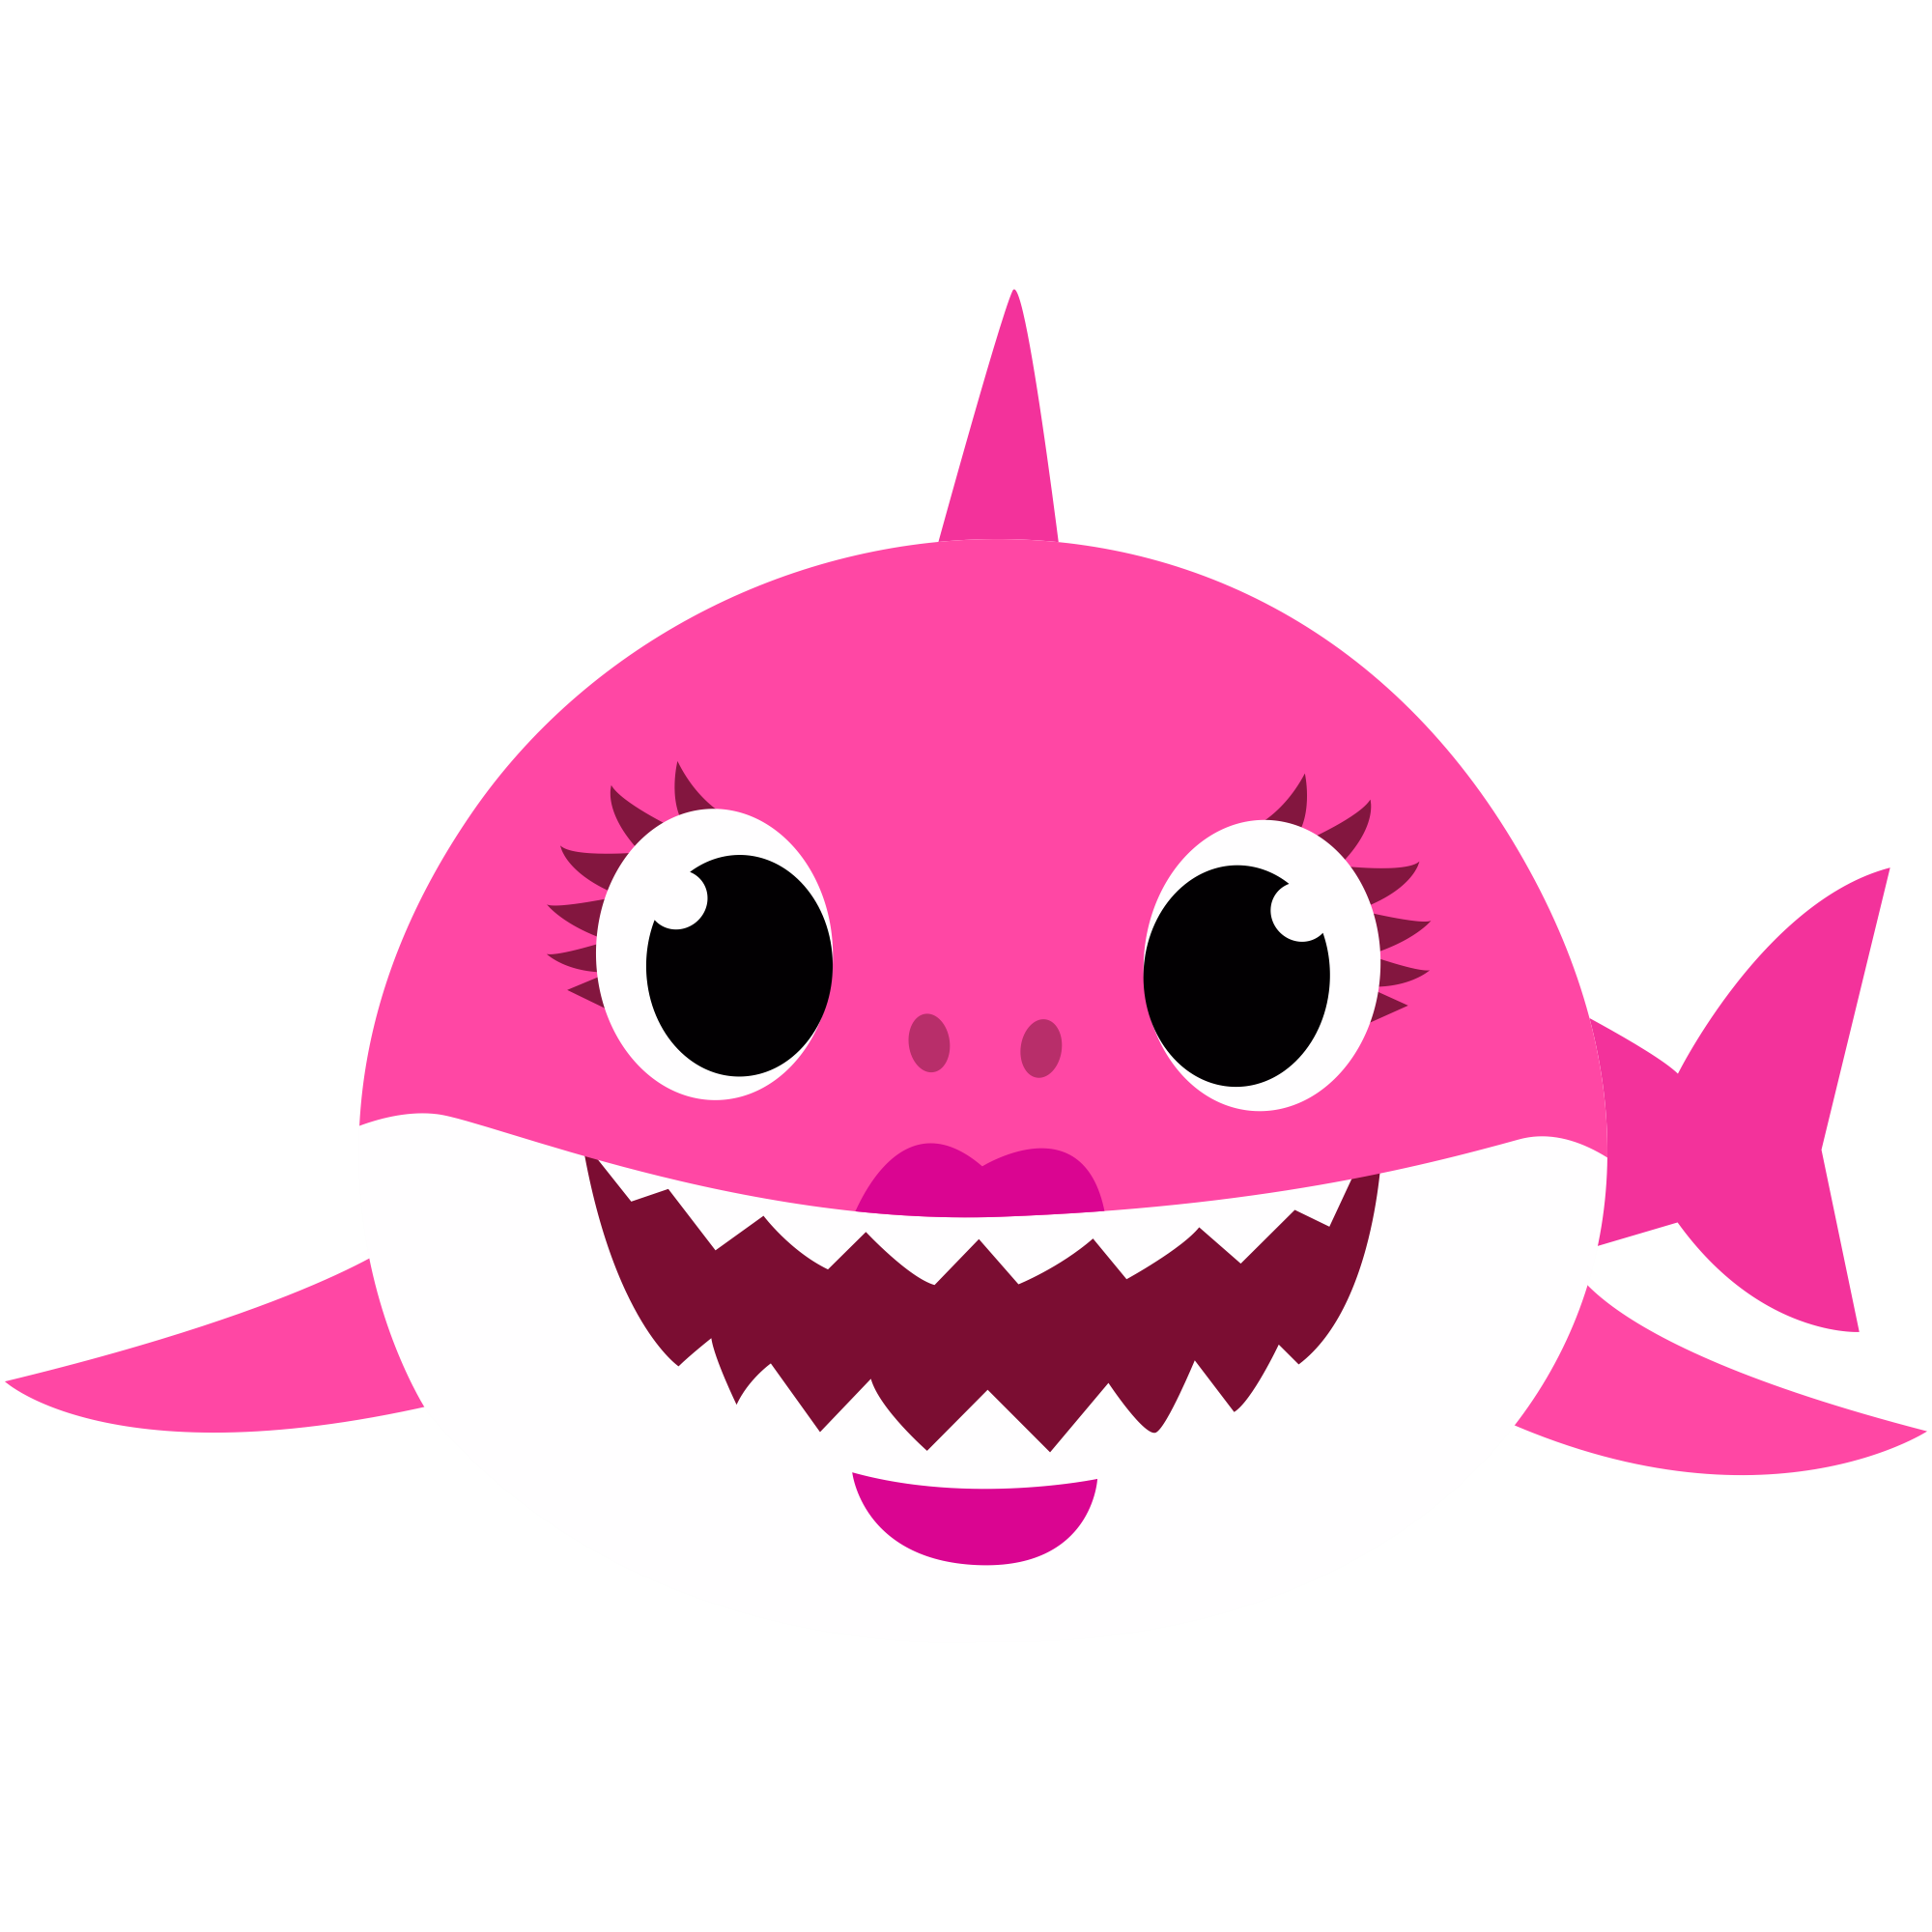 Cute Baby Shark PNG Image Background